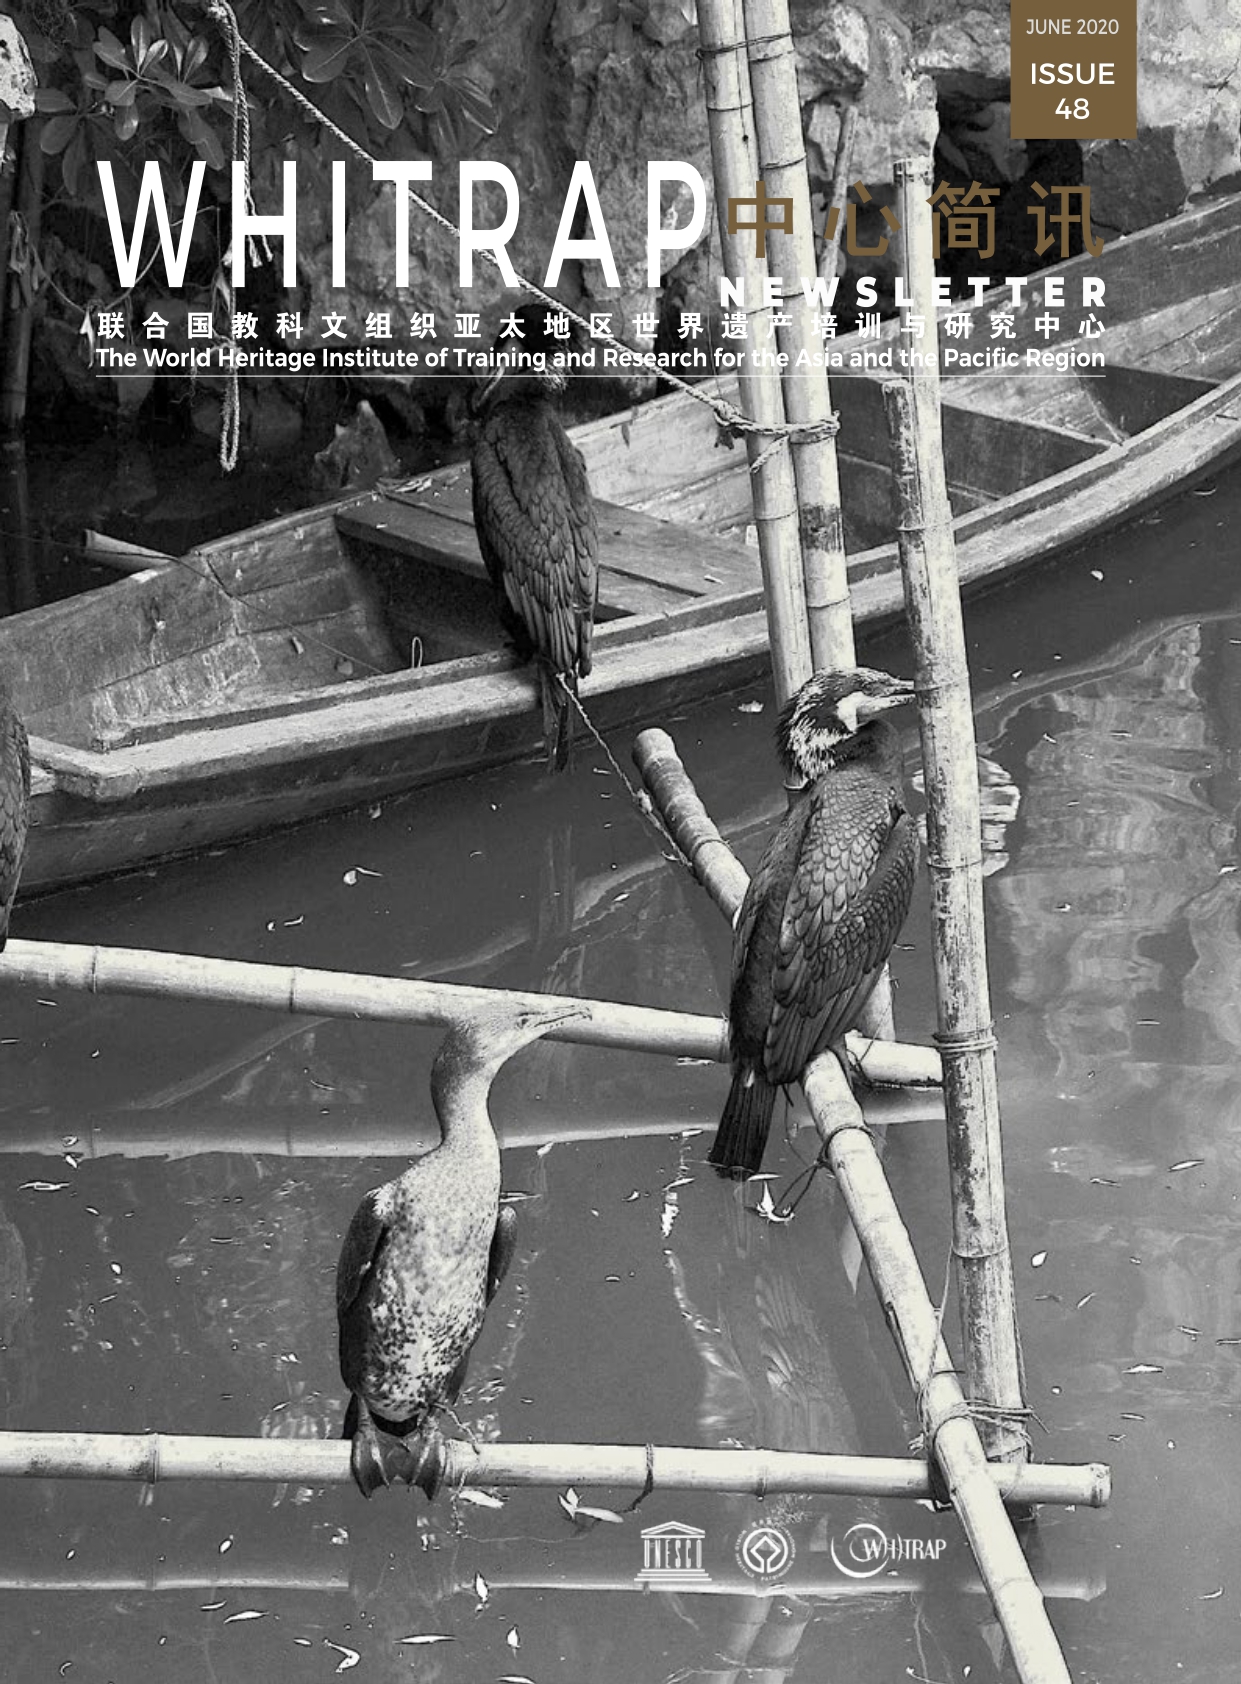 WHITRAP Newsletter (Issue 48)